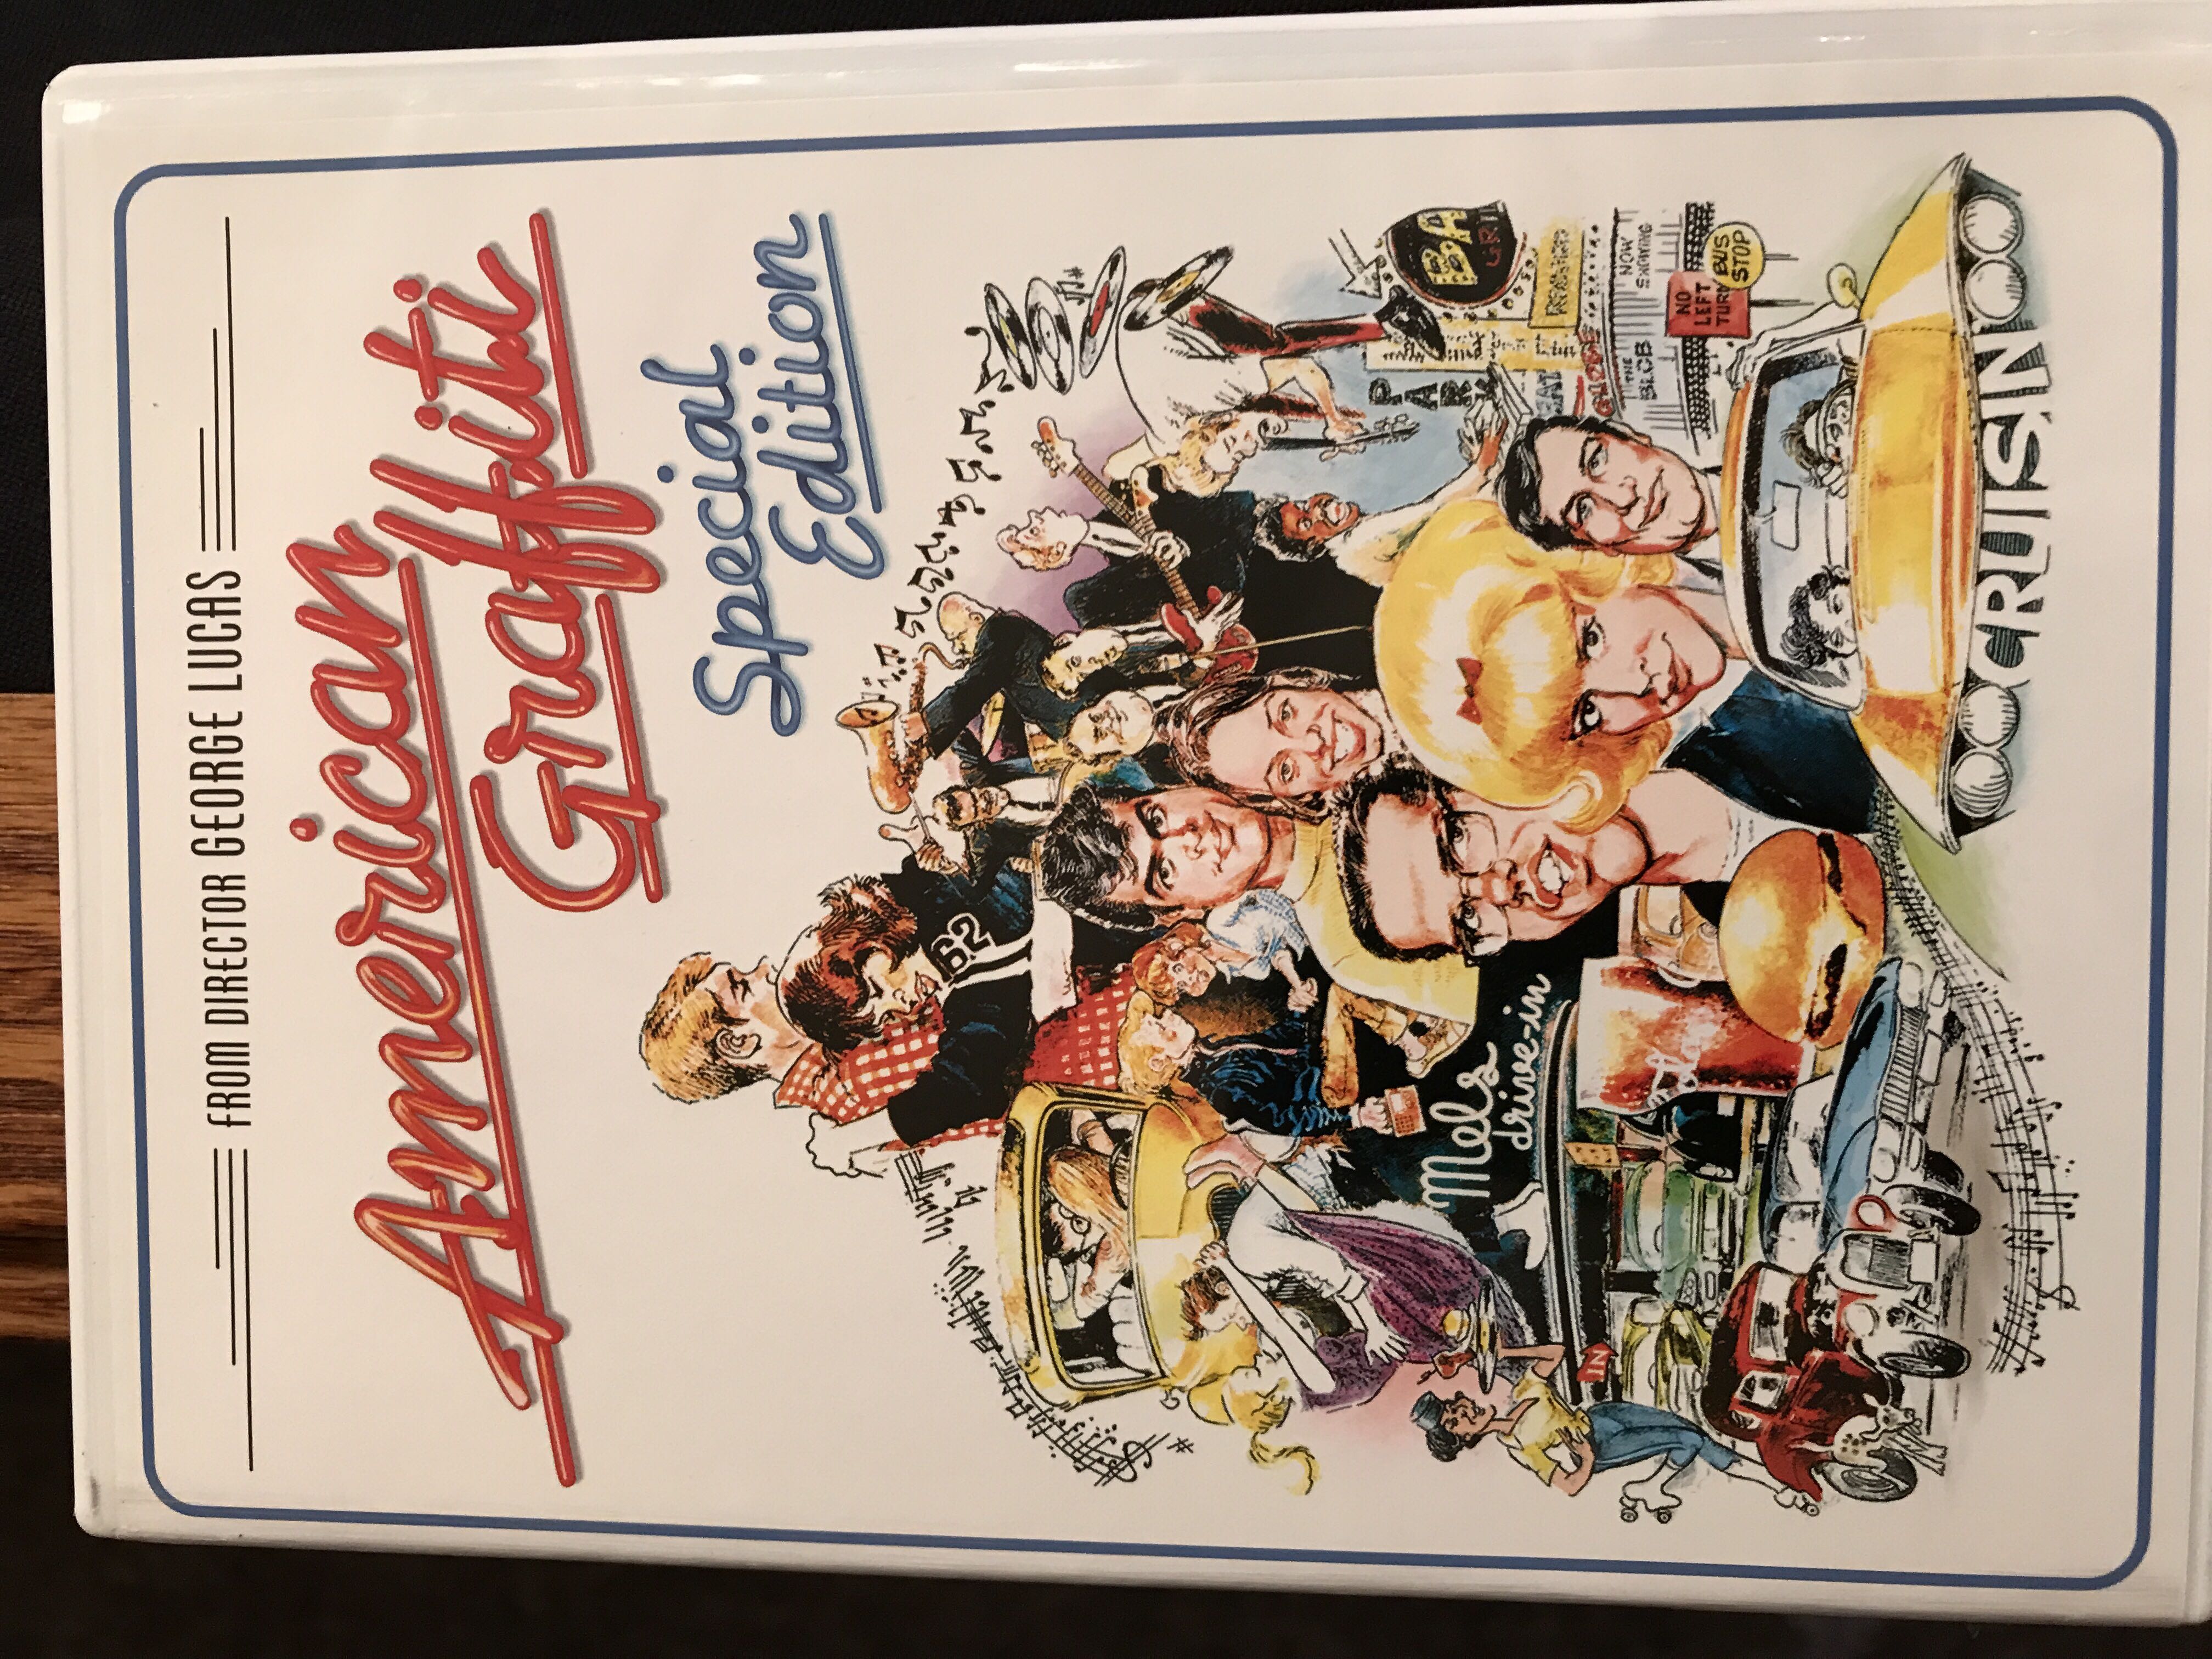 American Graffiti Special Edition DVD movie collectible [Barcode 025195051026] - Main Image 3